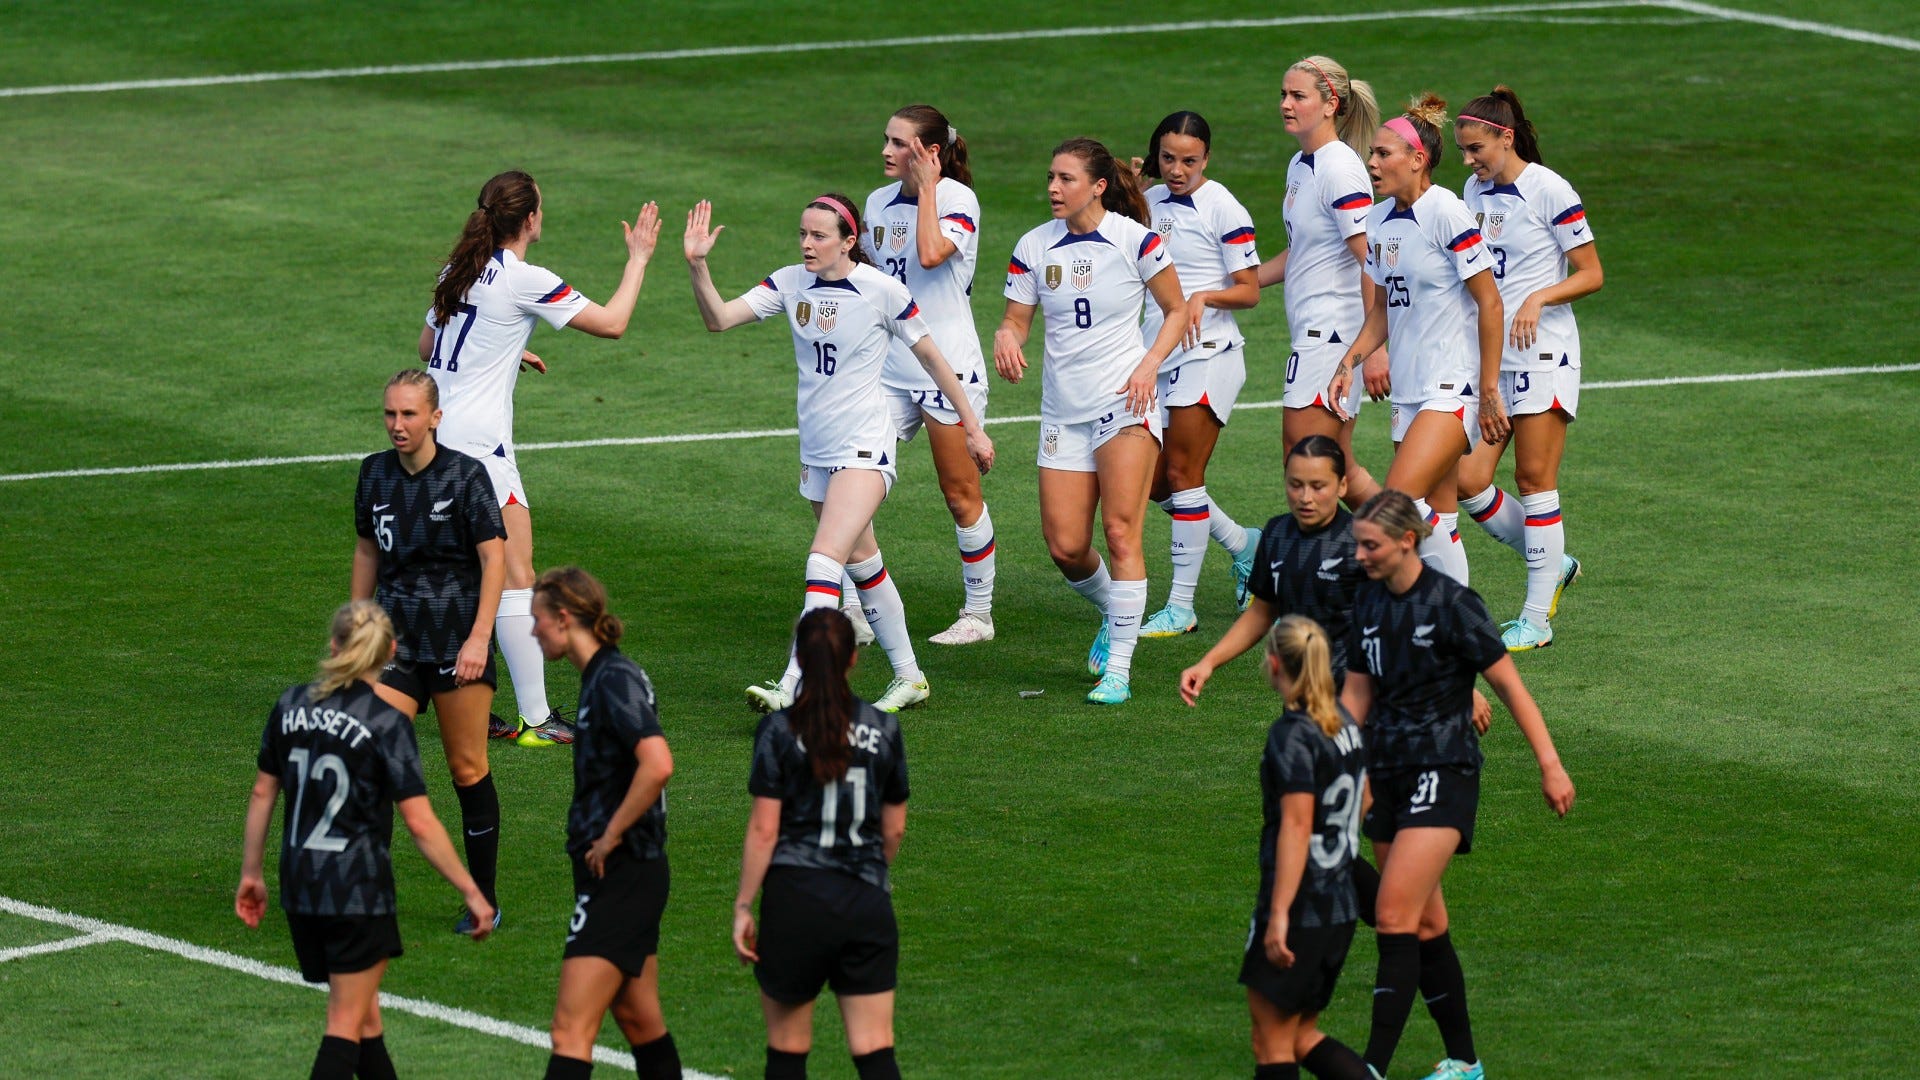 New last name, same result Swanson leads USWNT's win over New Zealand